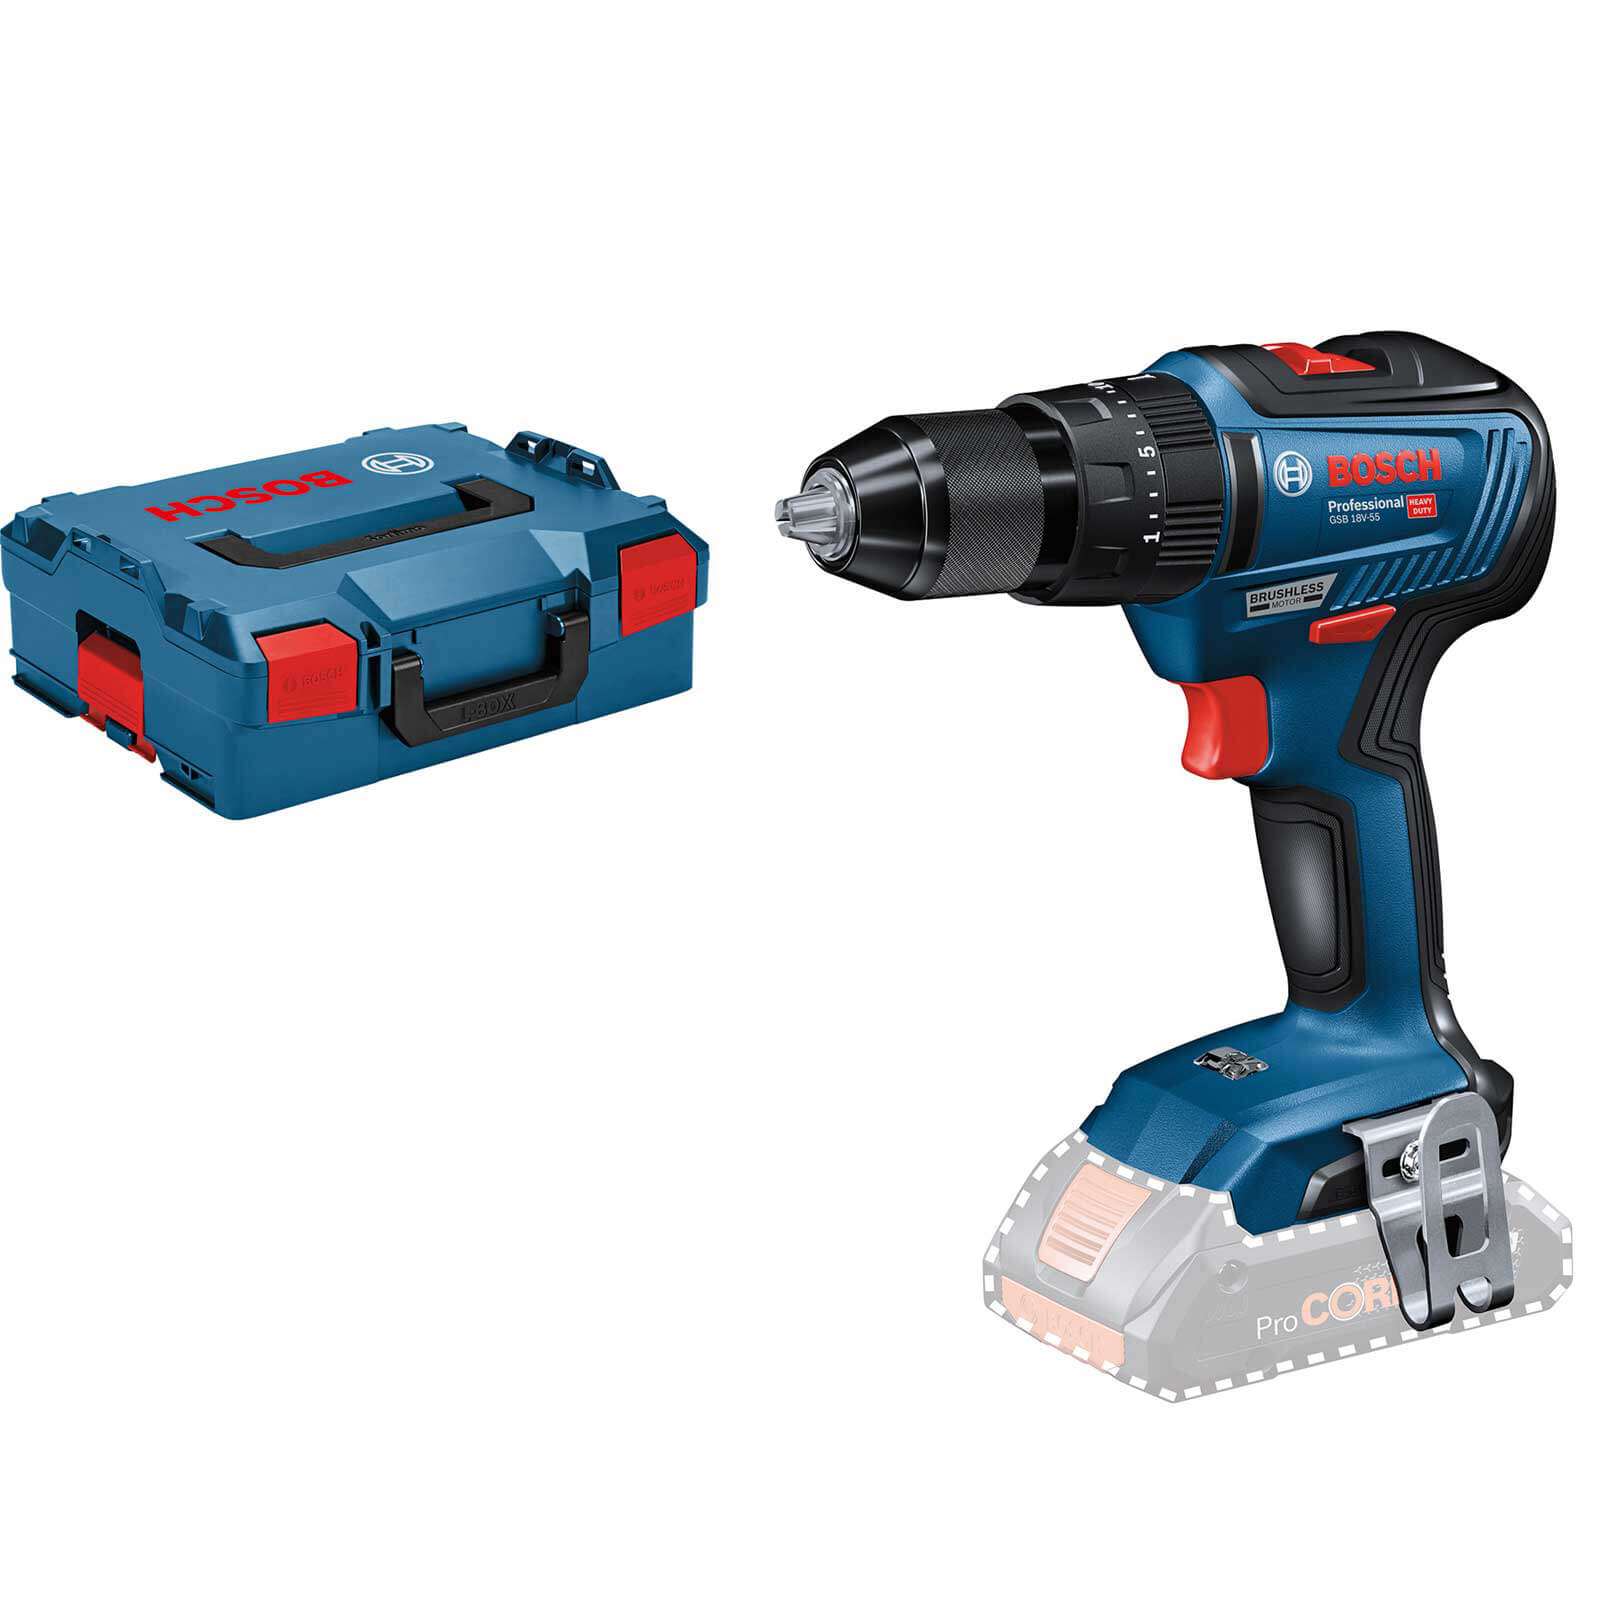 Photo of Bosch Gsb 18v-55 18v Cordless Brushless Combi Drill No Batteries No Charger Case